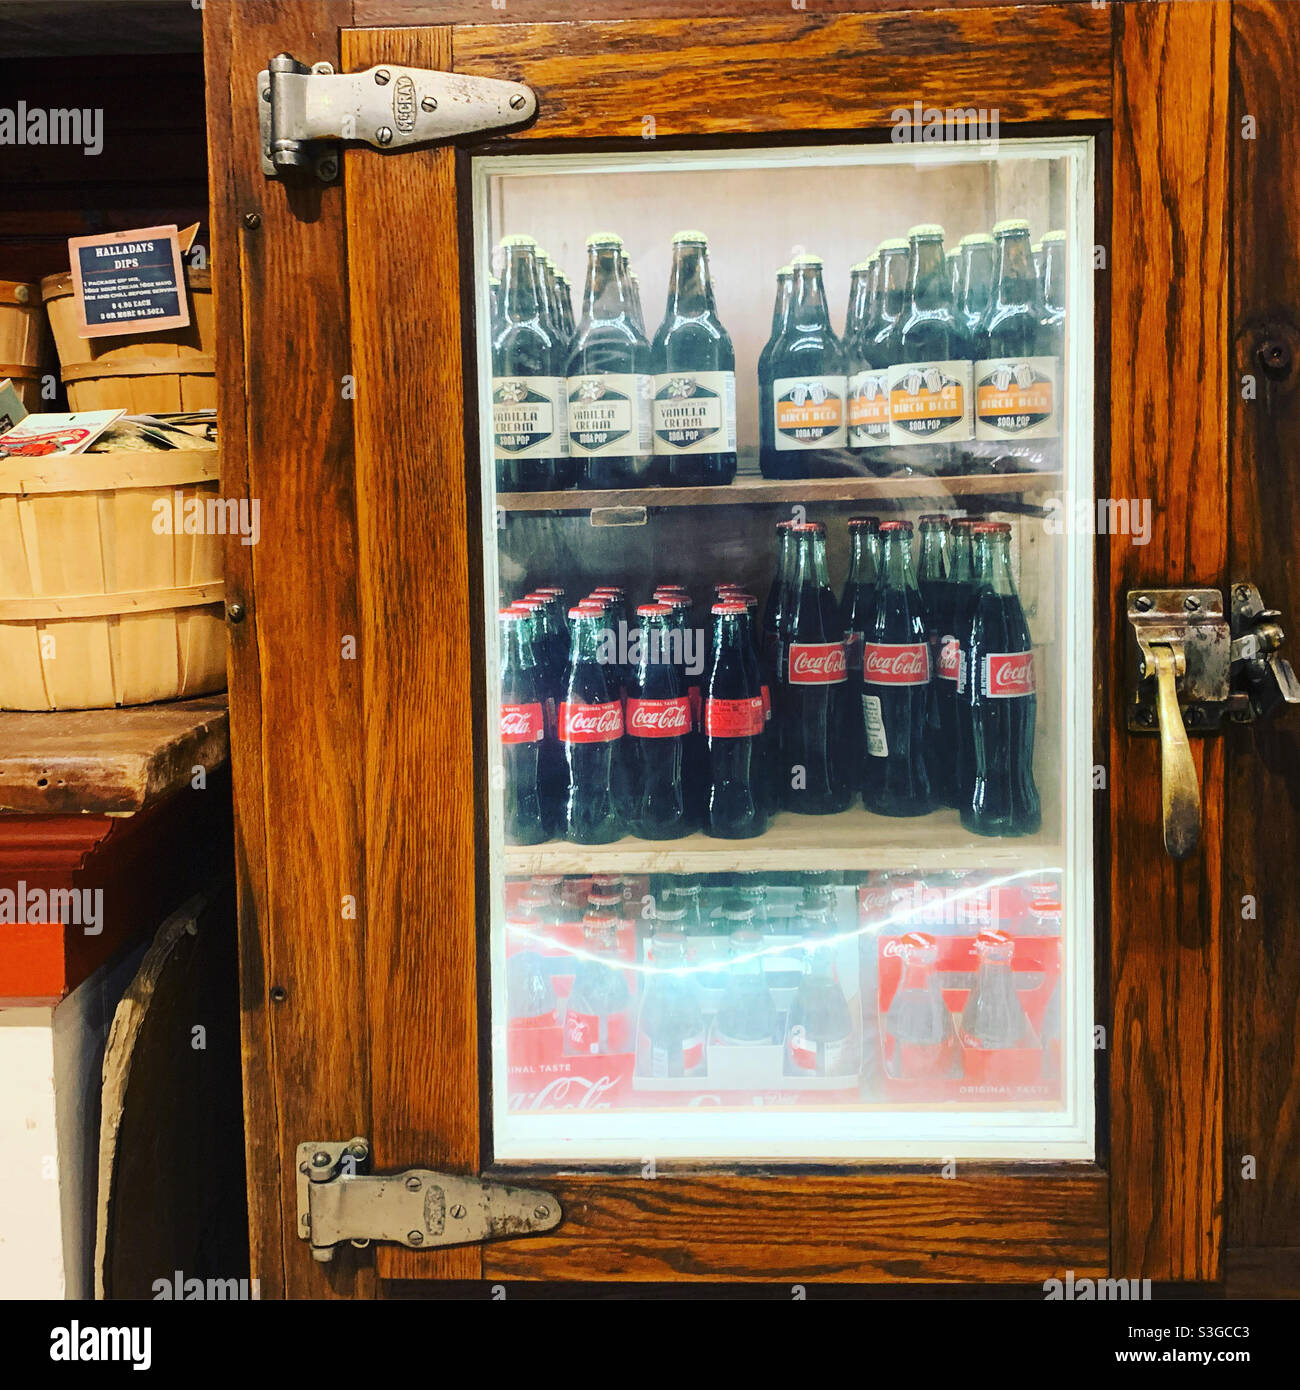 Sodas in a refrigerator, Vermont Country Store, Rockingham, Windham County, Vermont, United States Stock Photo